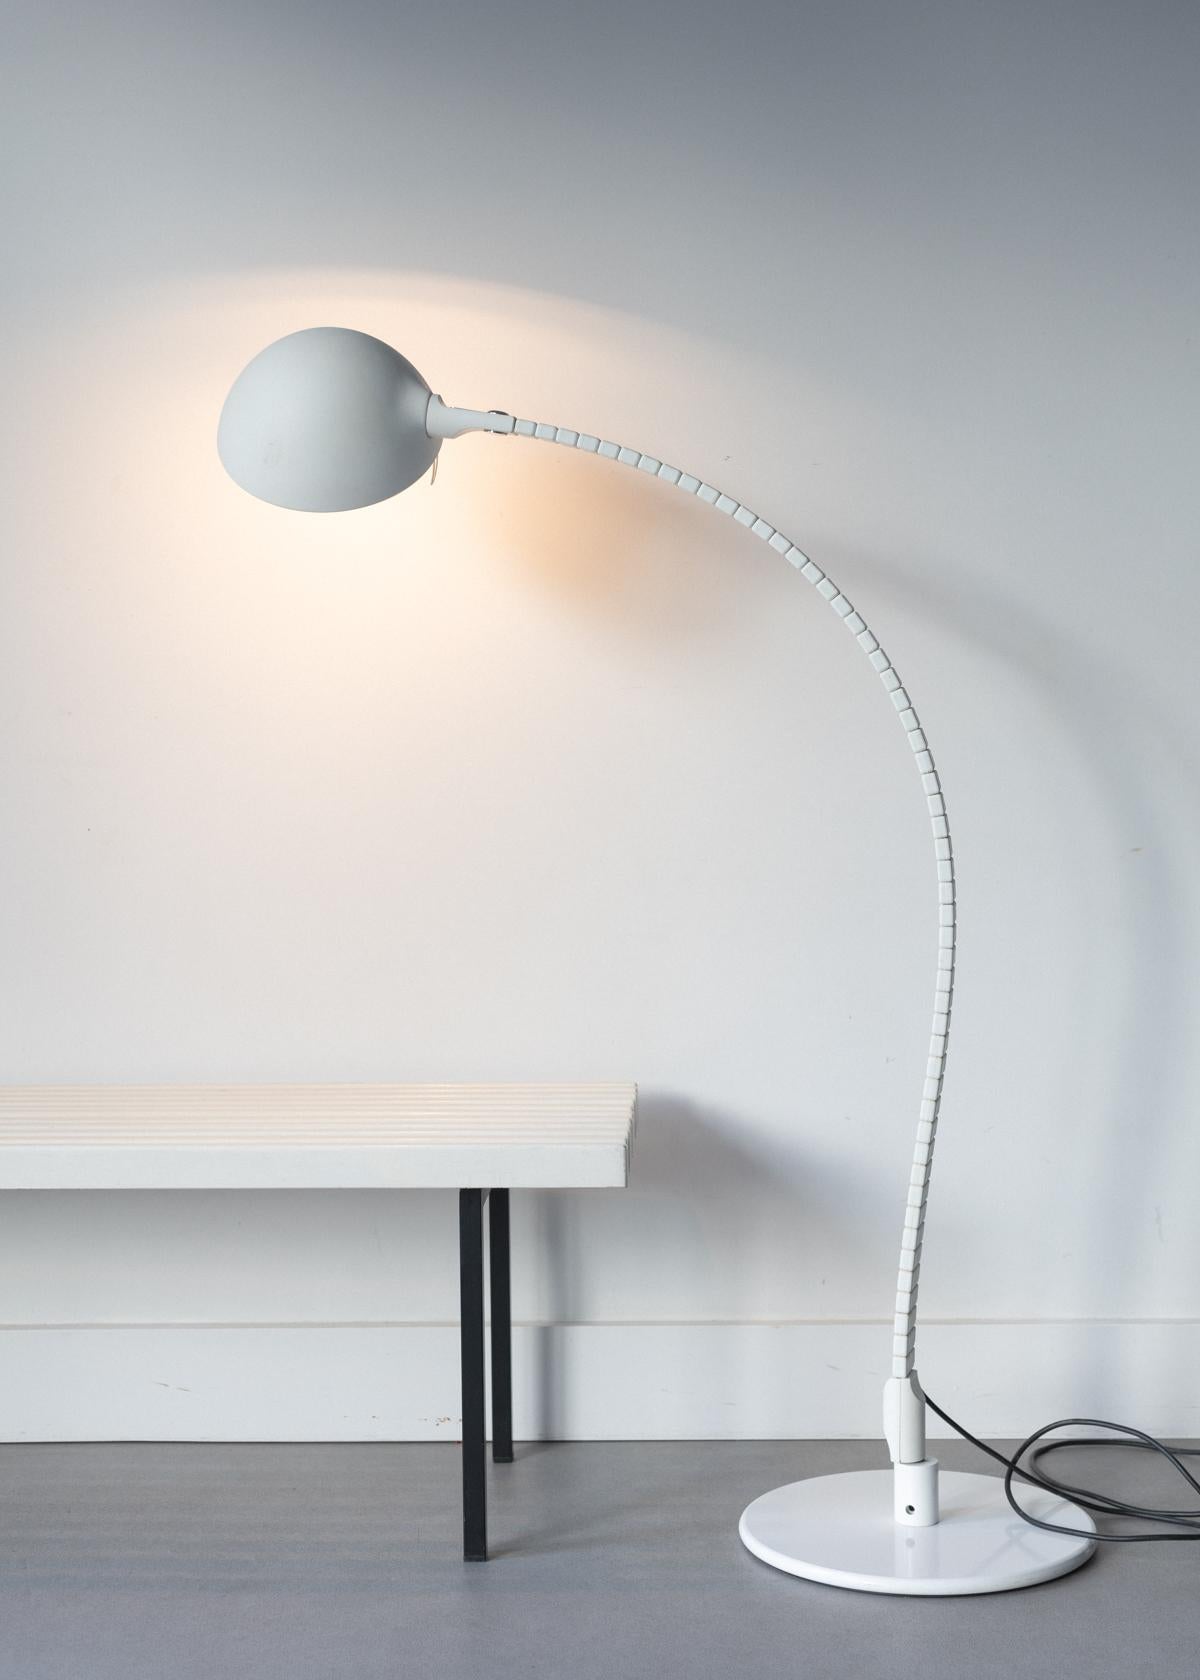 Discover the classic 60's look of the Flex Floorlamp by Elio Martinelli. Offering modern function with timeless style, this lamp is designed to adjust with your ever-changing needs - adjust the light with just one hand! With its sleek lines, classic